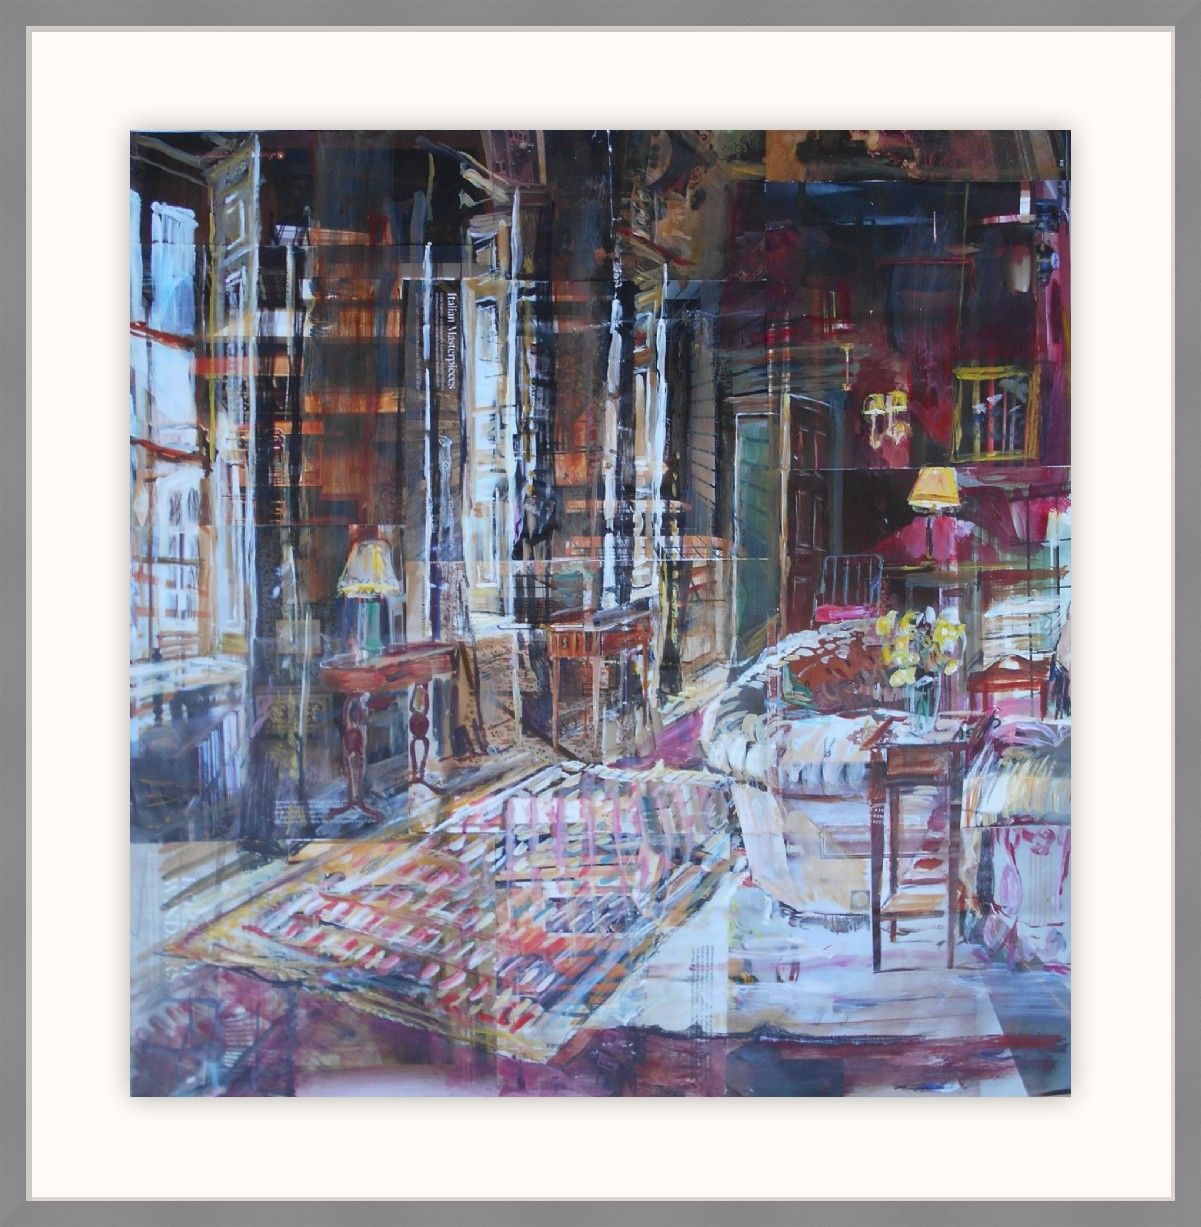 West Horsley Place, Drawing Room (Masterpieces) by Alison Pullen